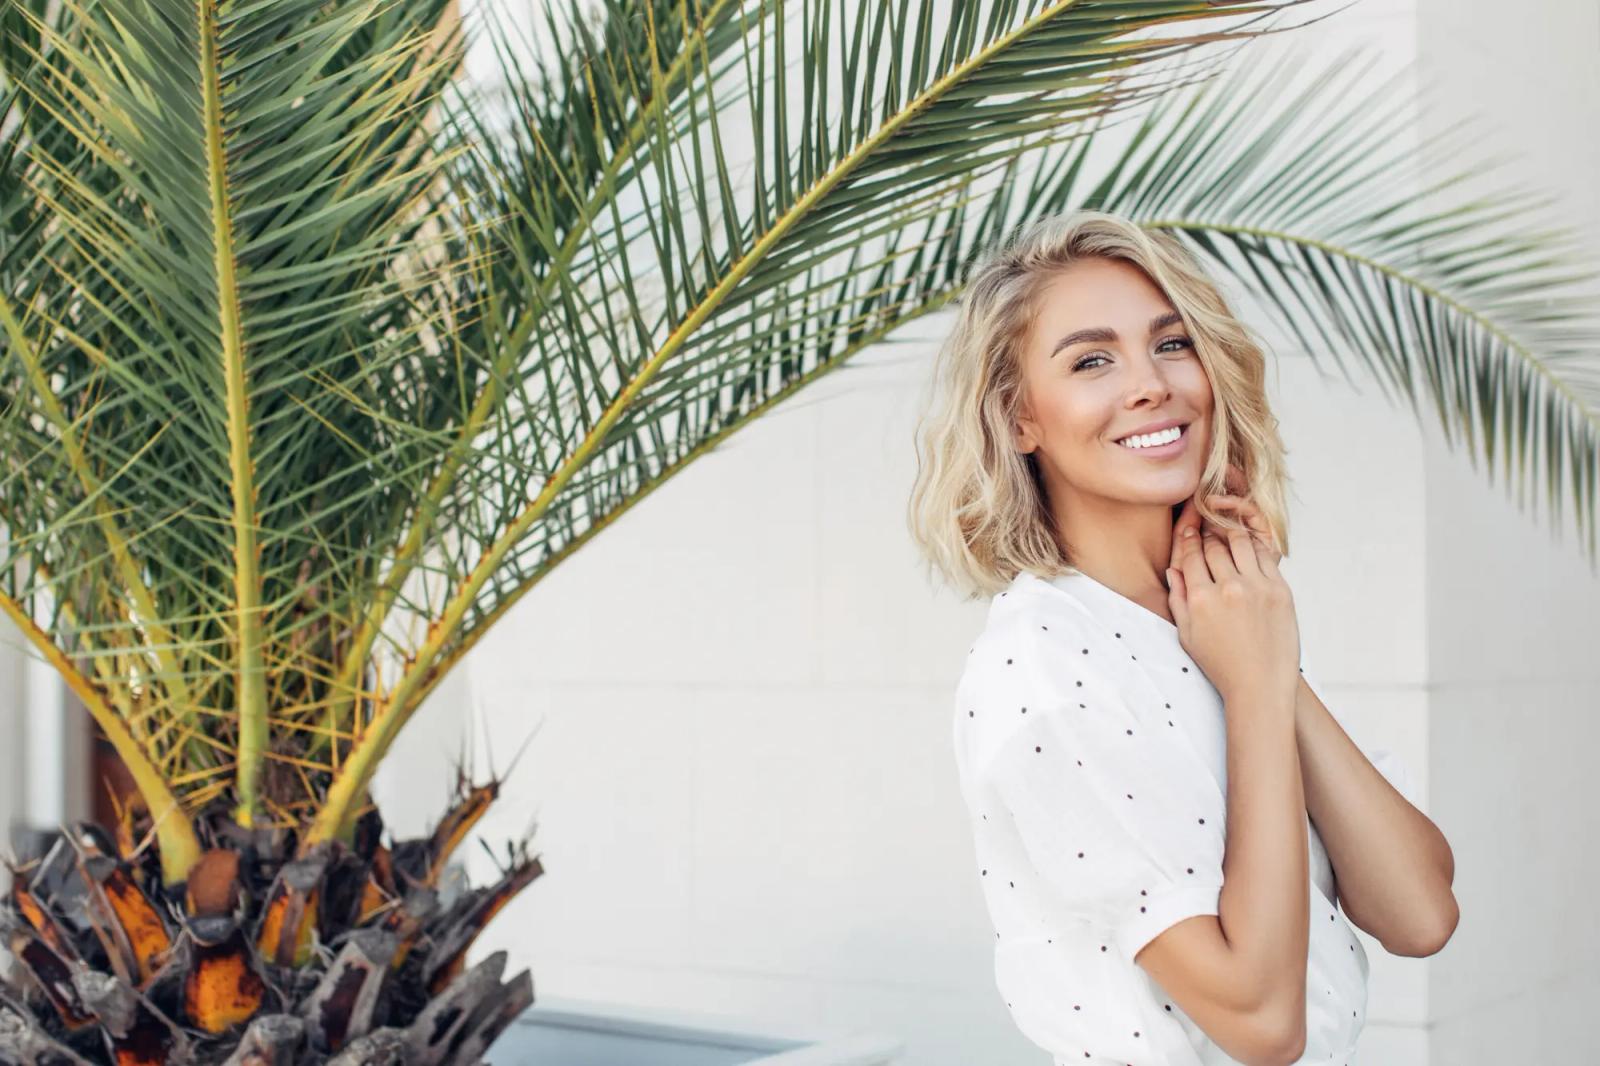 Blonde woman with wavy short hair stands on her left side standing at the camera next to a palm tree